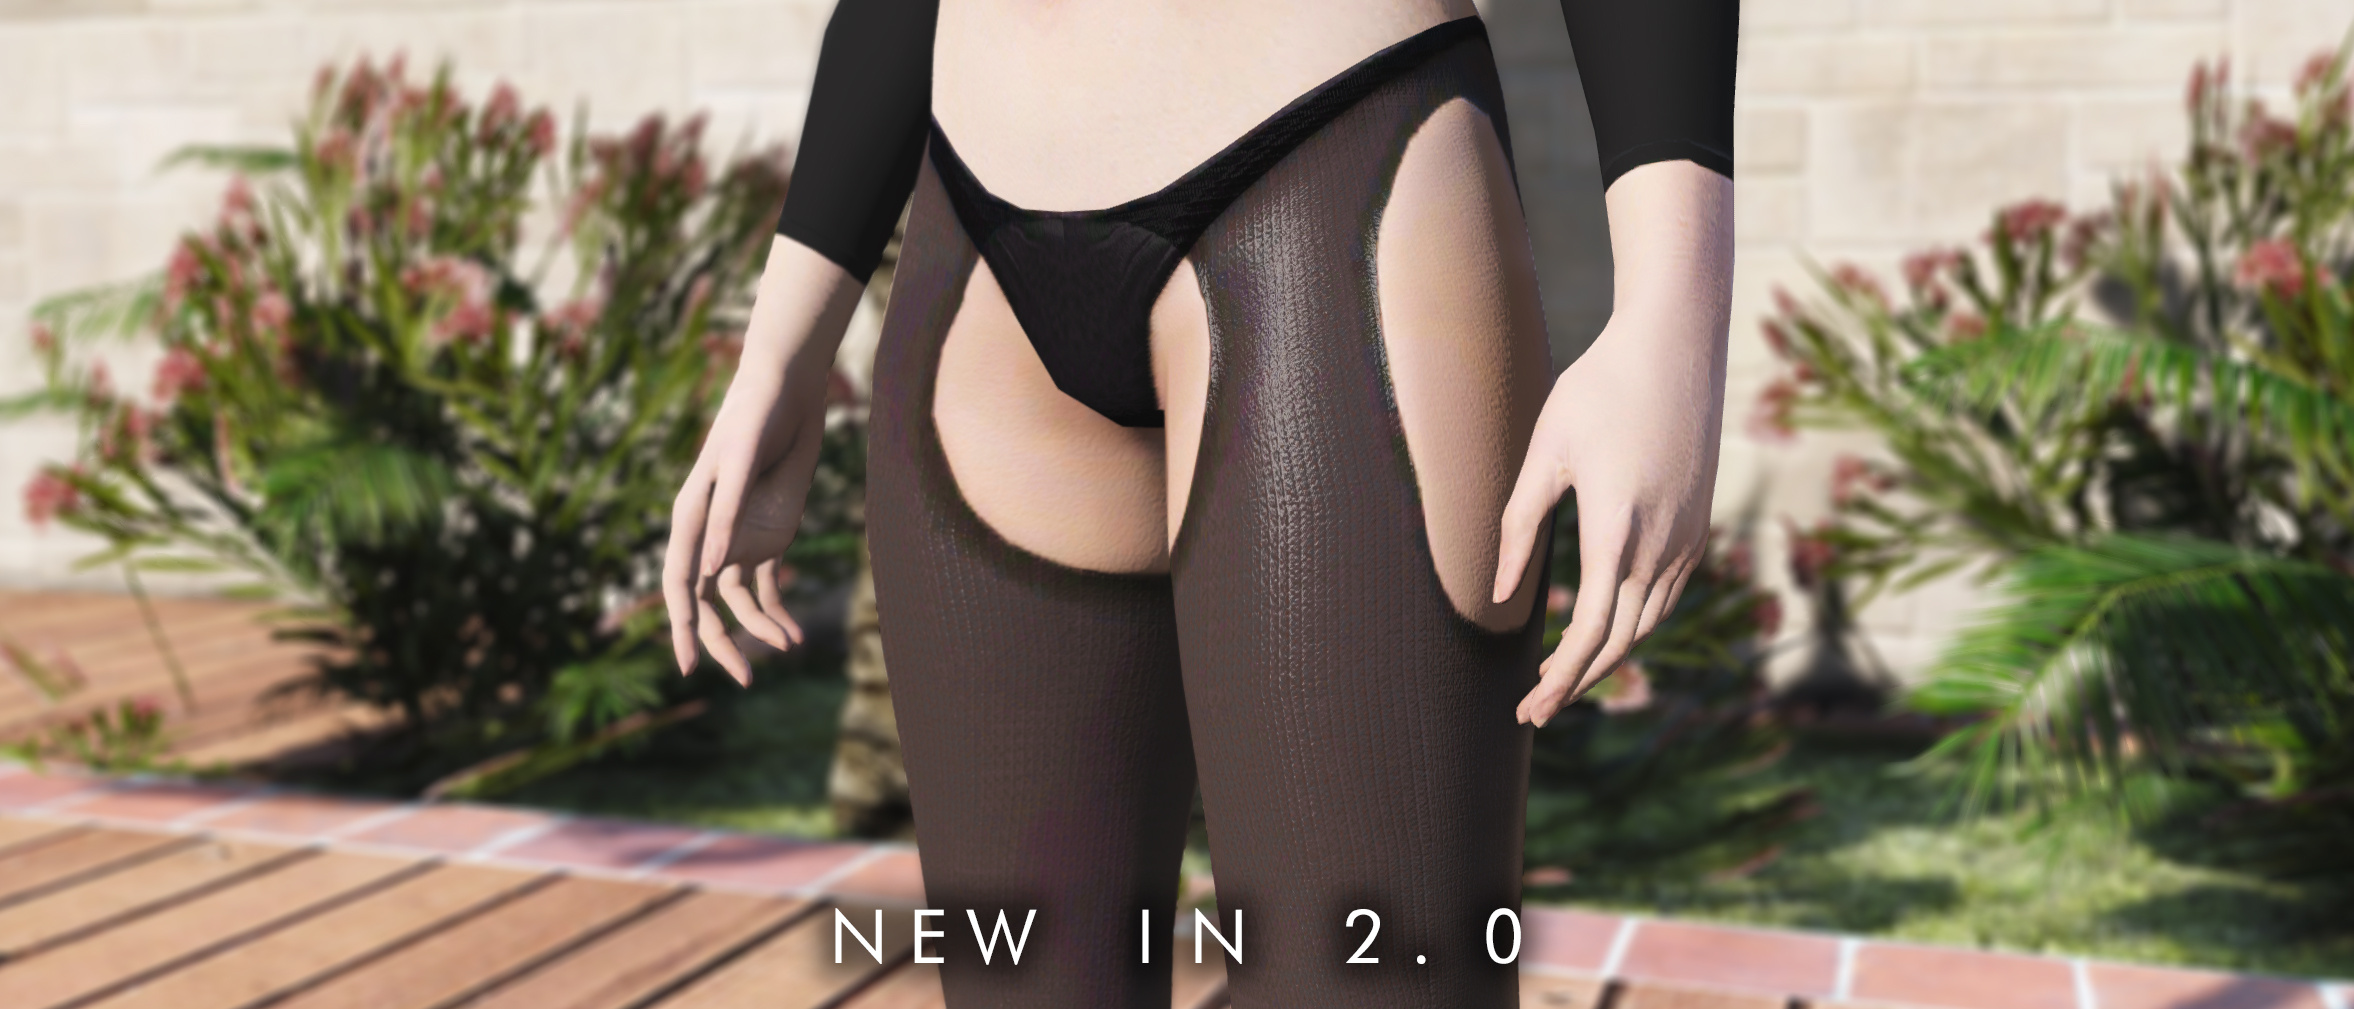 Pantyhose for mp female